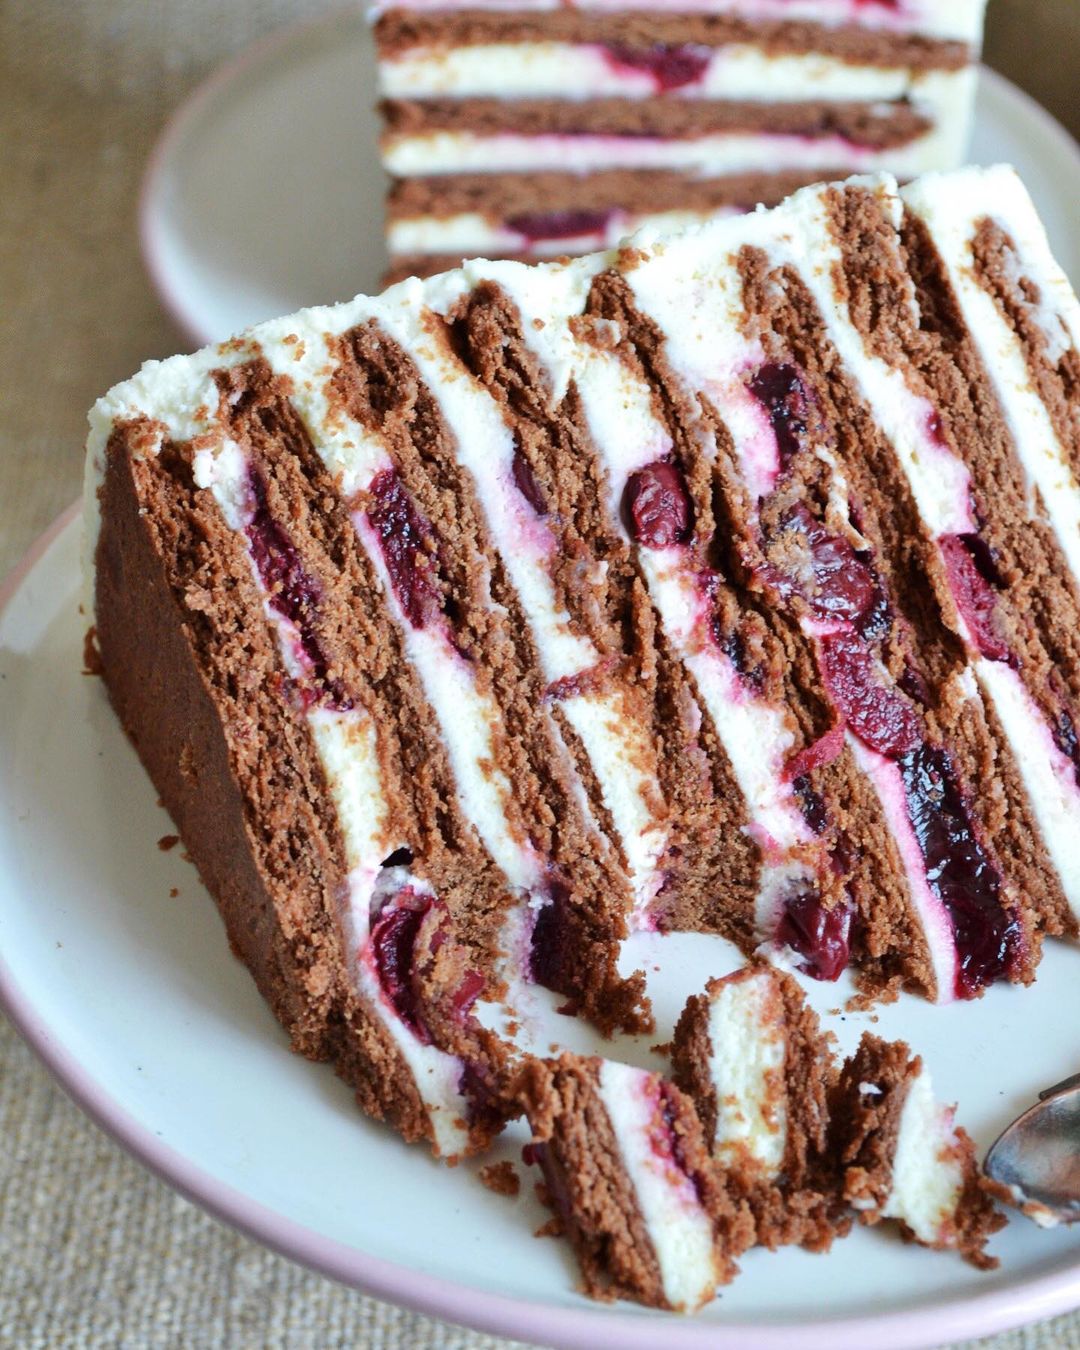 Chocolate cake with cottage cheese & cherries